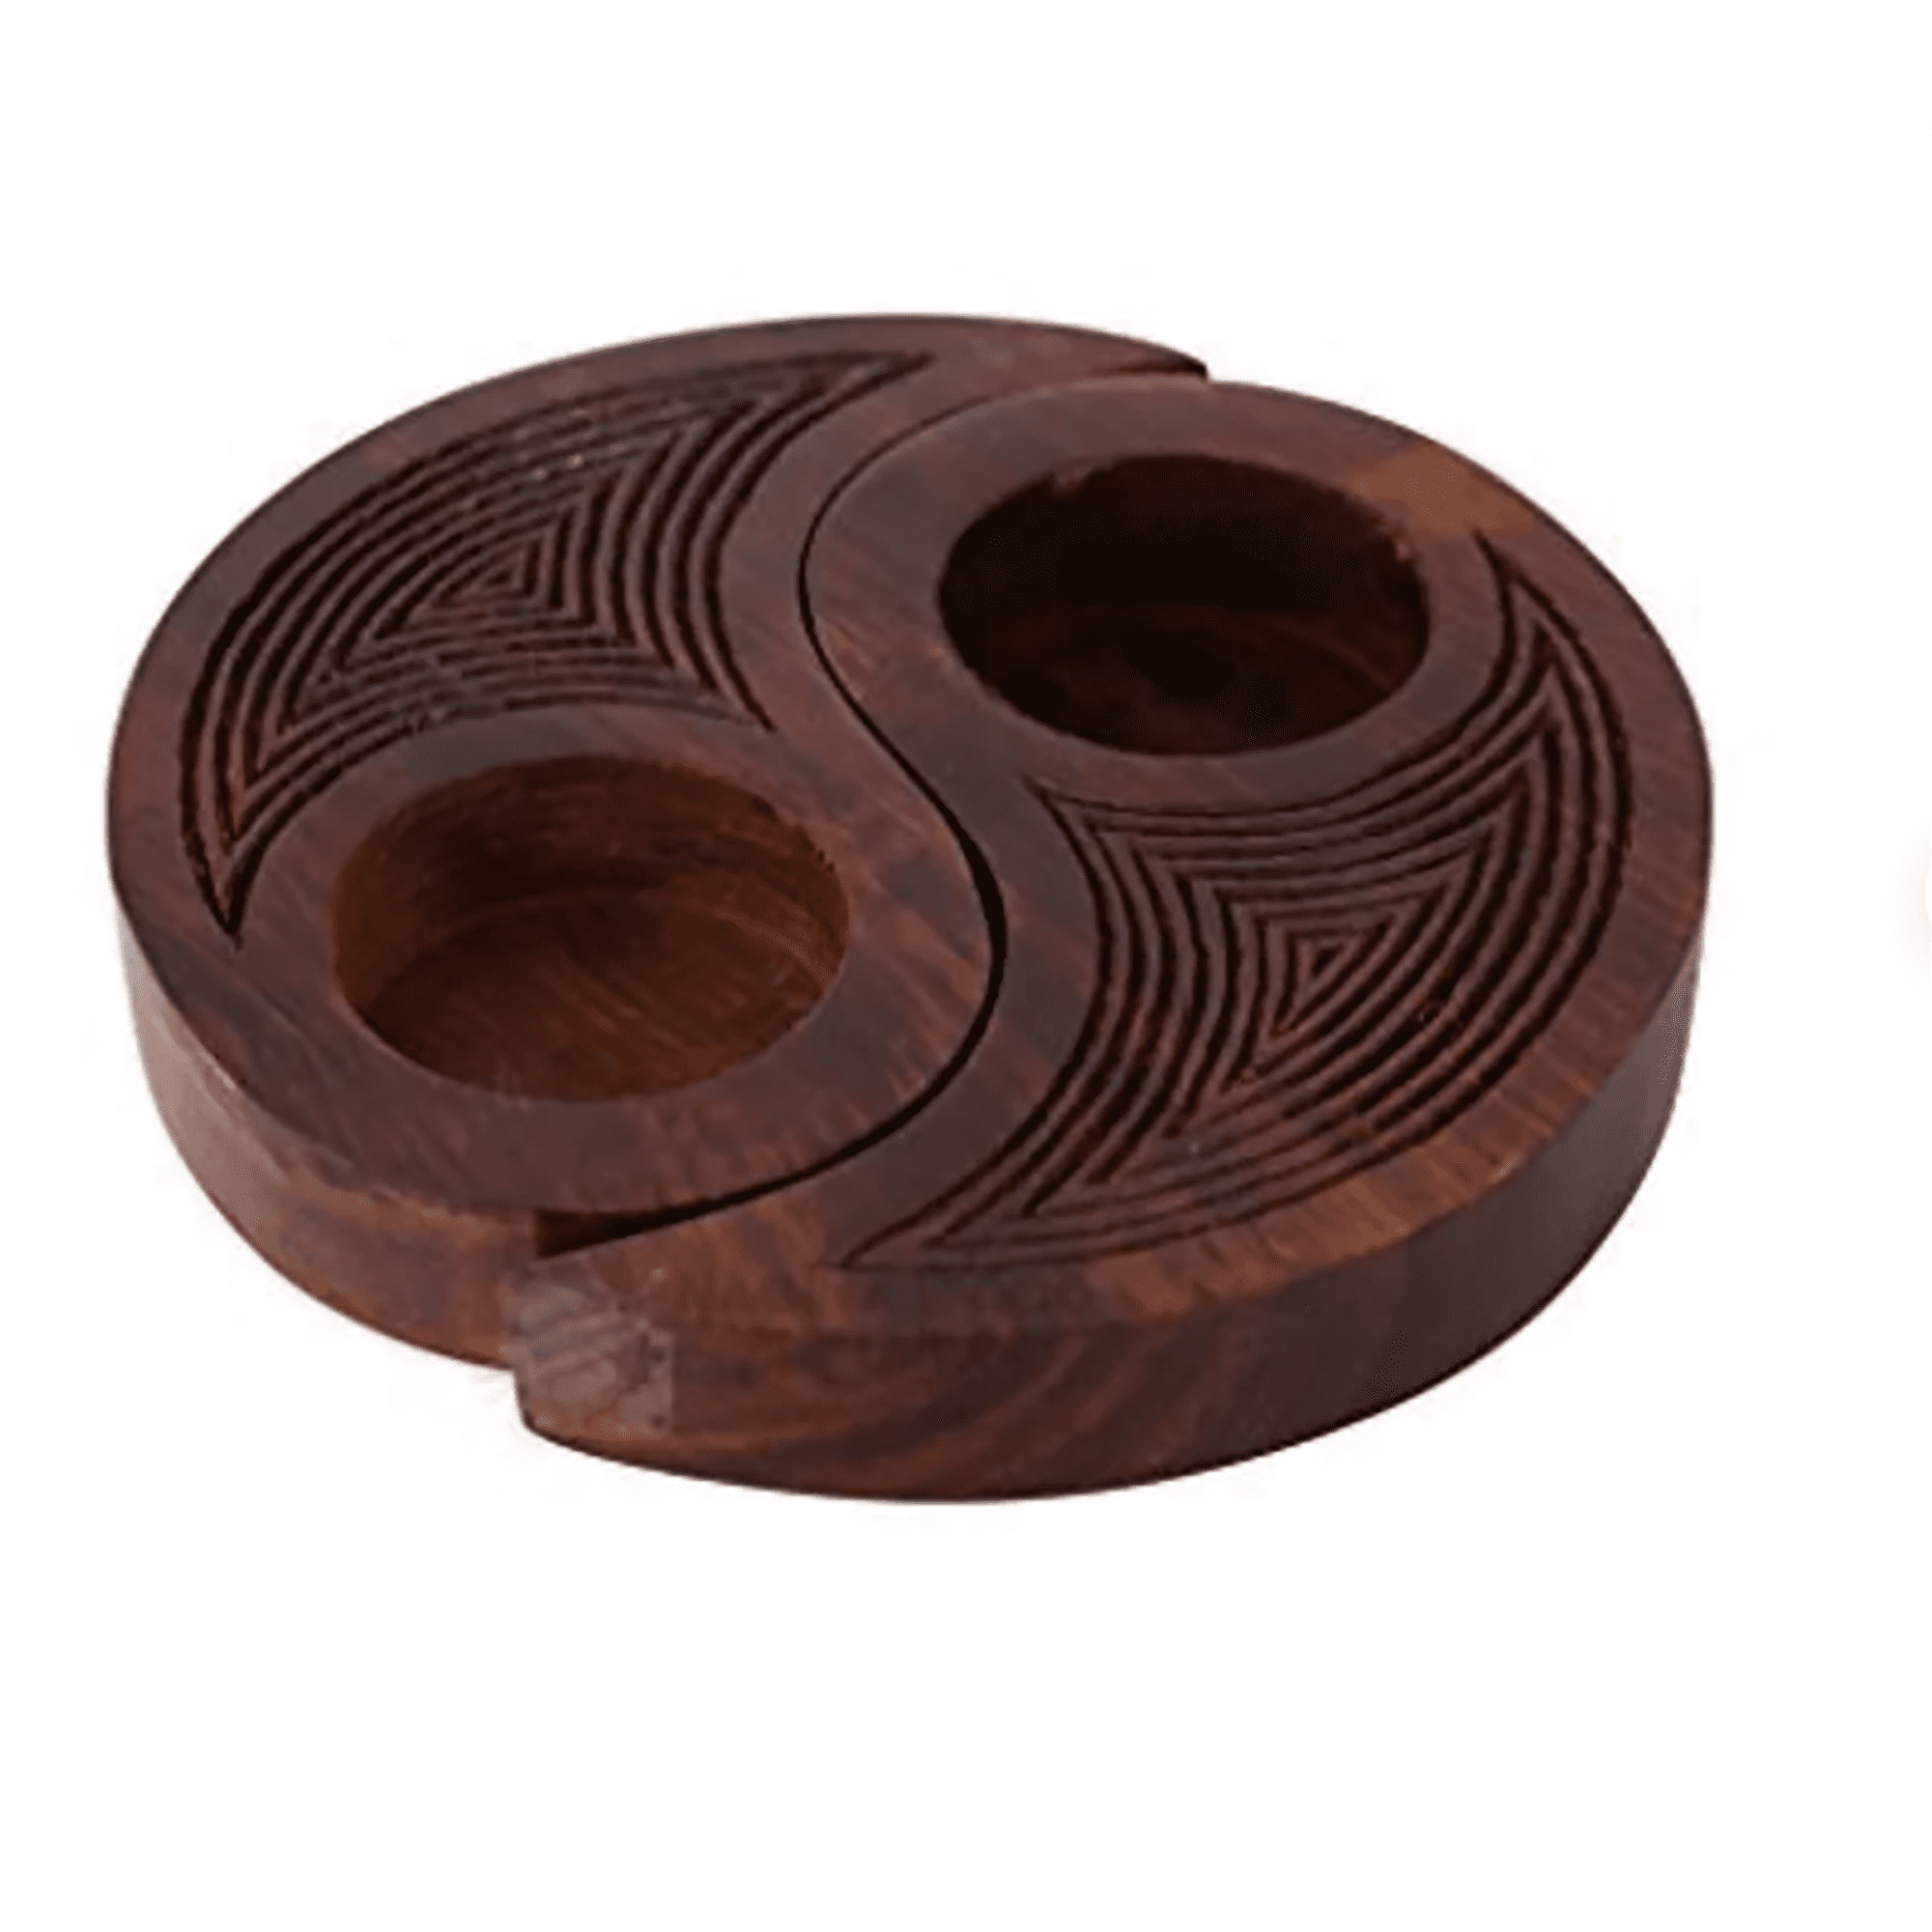 Wooden Tea Light Holder Hand Carved | Diwali and Christmas Gift Idea | Home and Gift | Includes Tea Light (Pack of 2)